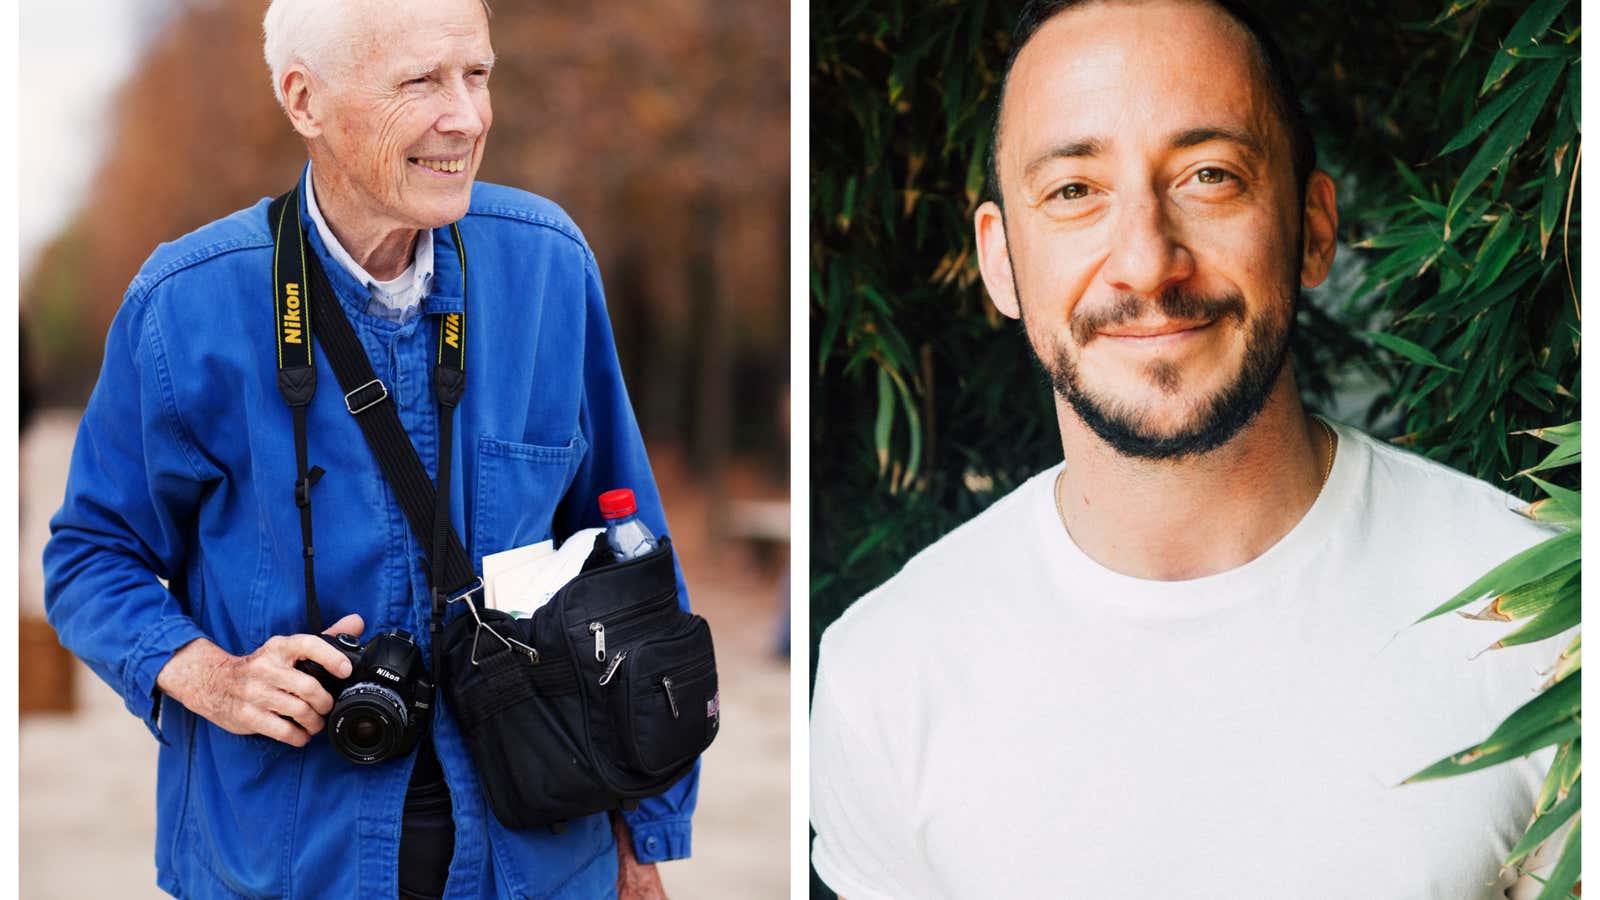 Bill Cunningham and Thomas Page McBee